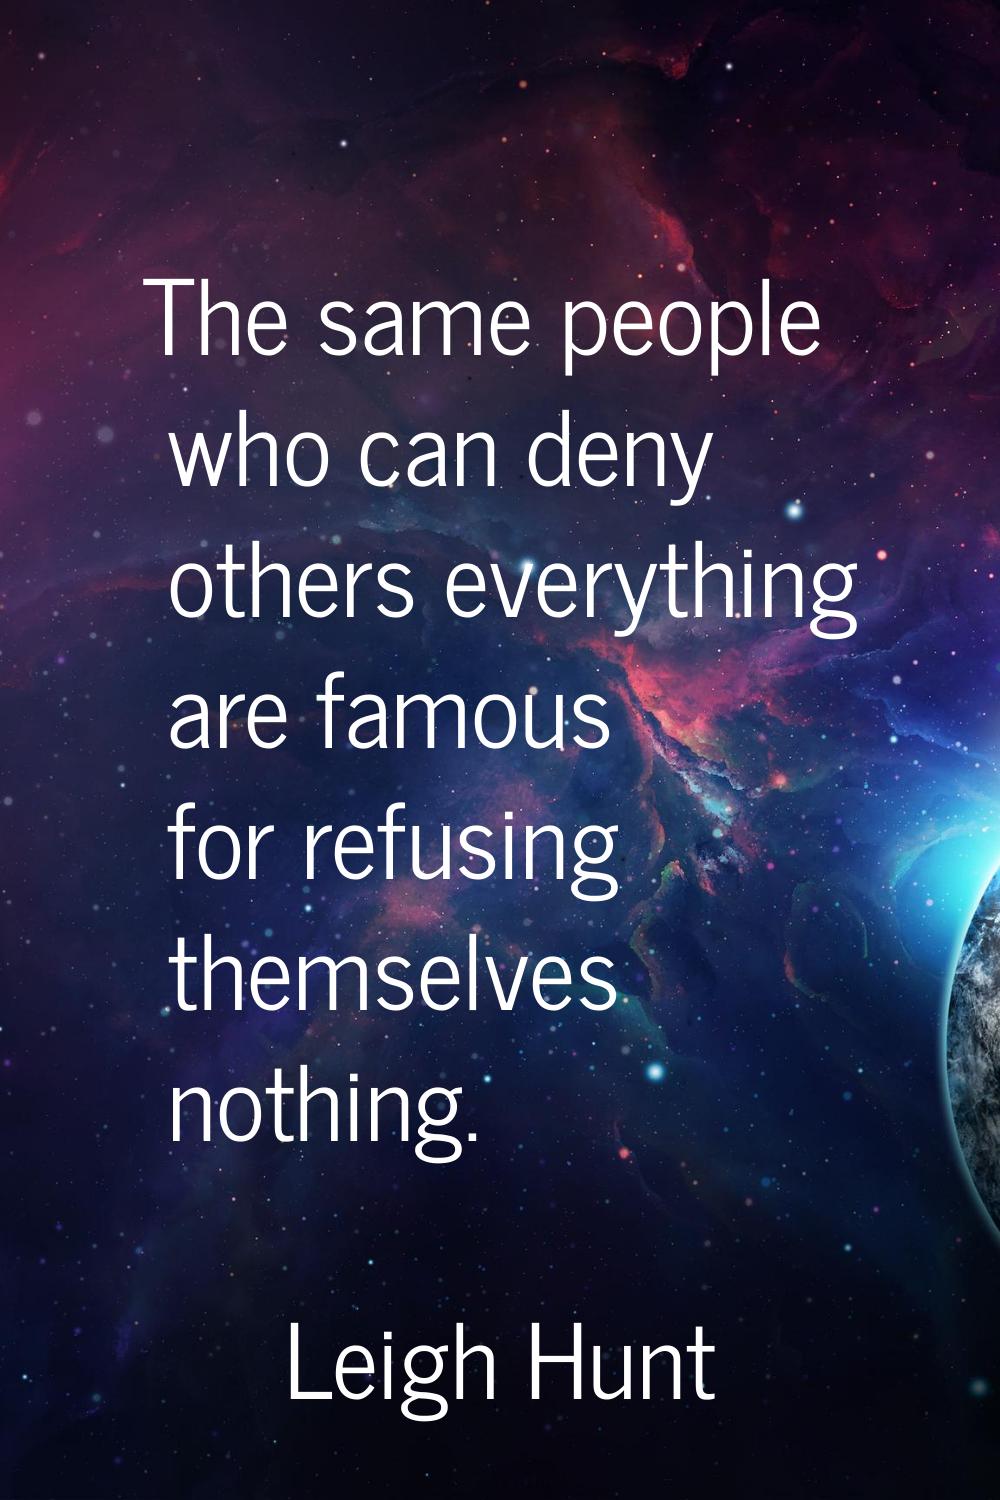 The same people who can deny others everything are famous for refusing themselves nothing.